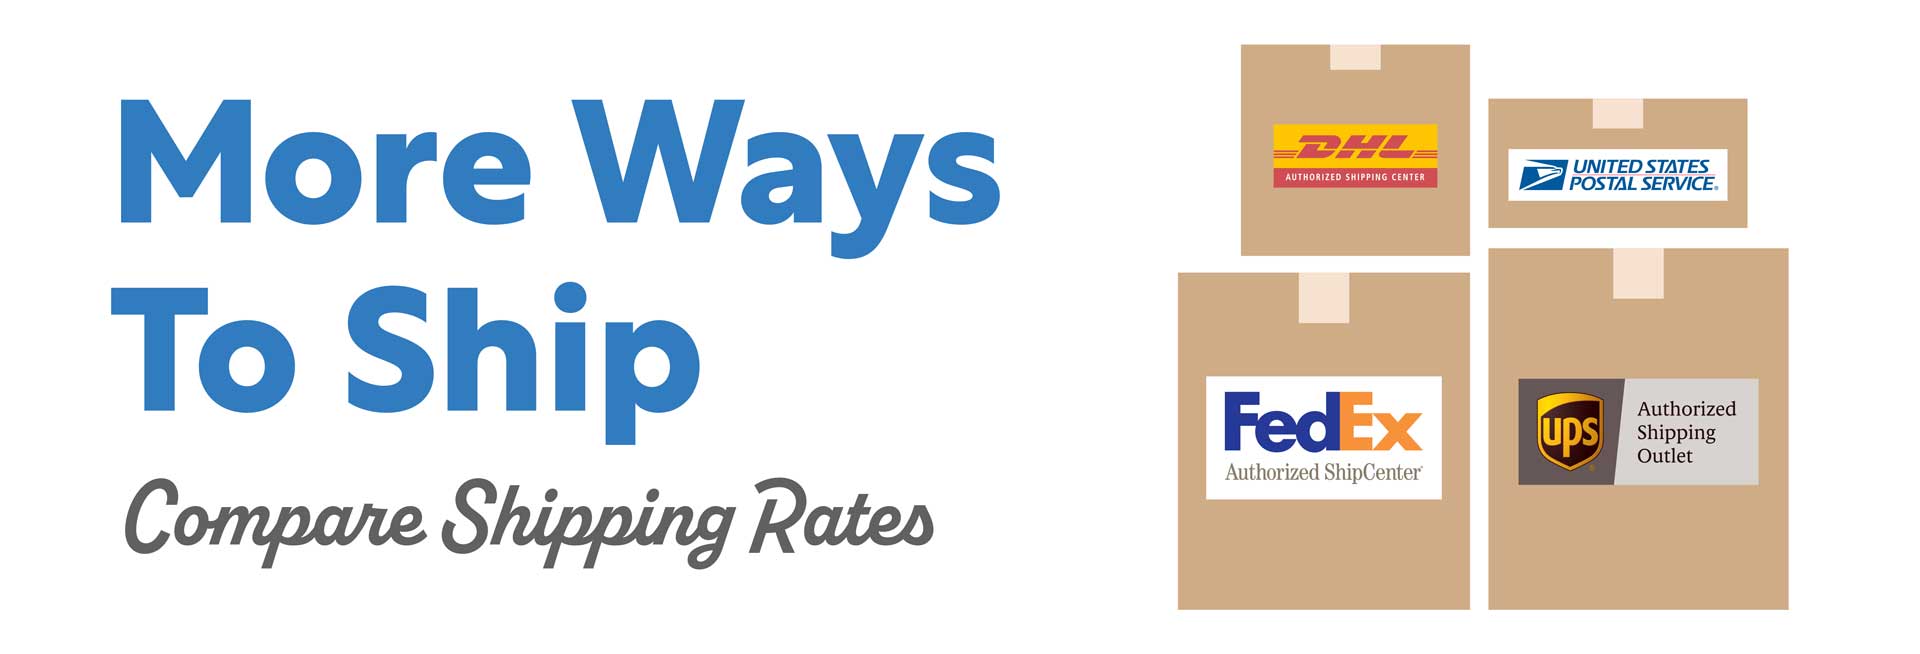 More Ways to Ship - Compare Shipping Rates - DHL, USPS, FedEx, UPS.